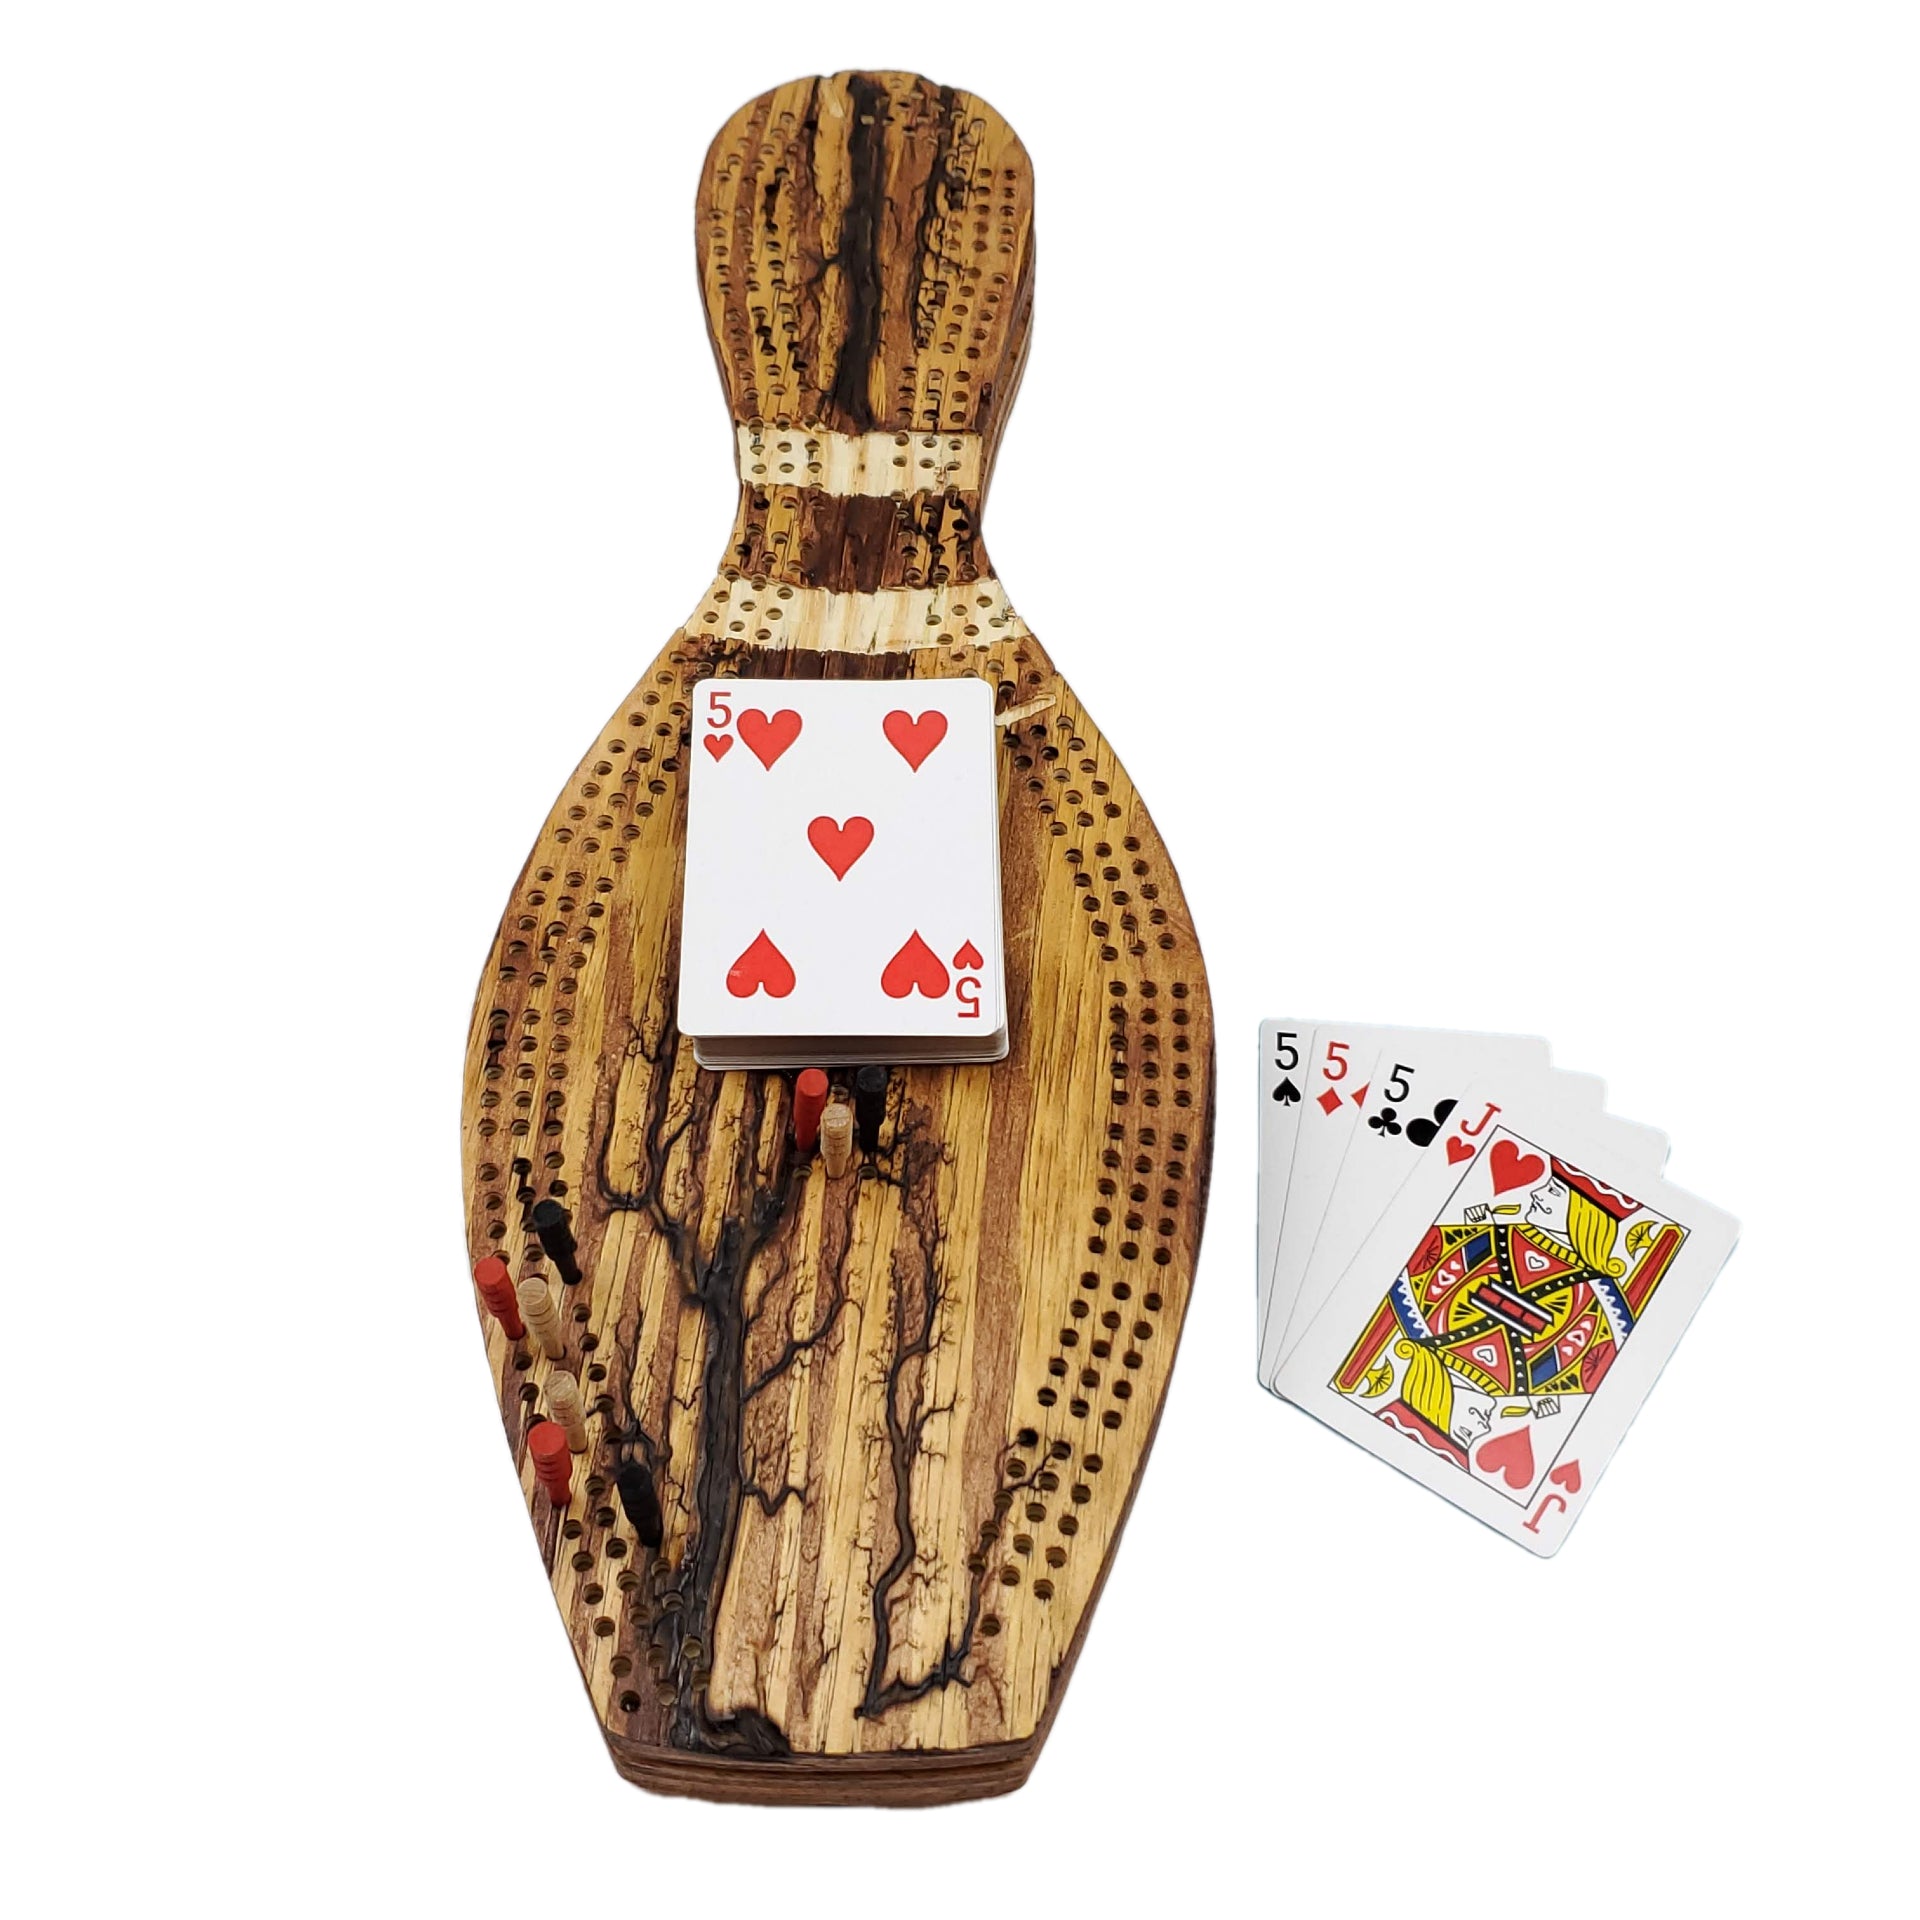 Deluxe Bowling Pin Cribbage Board